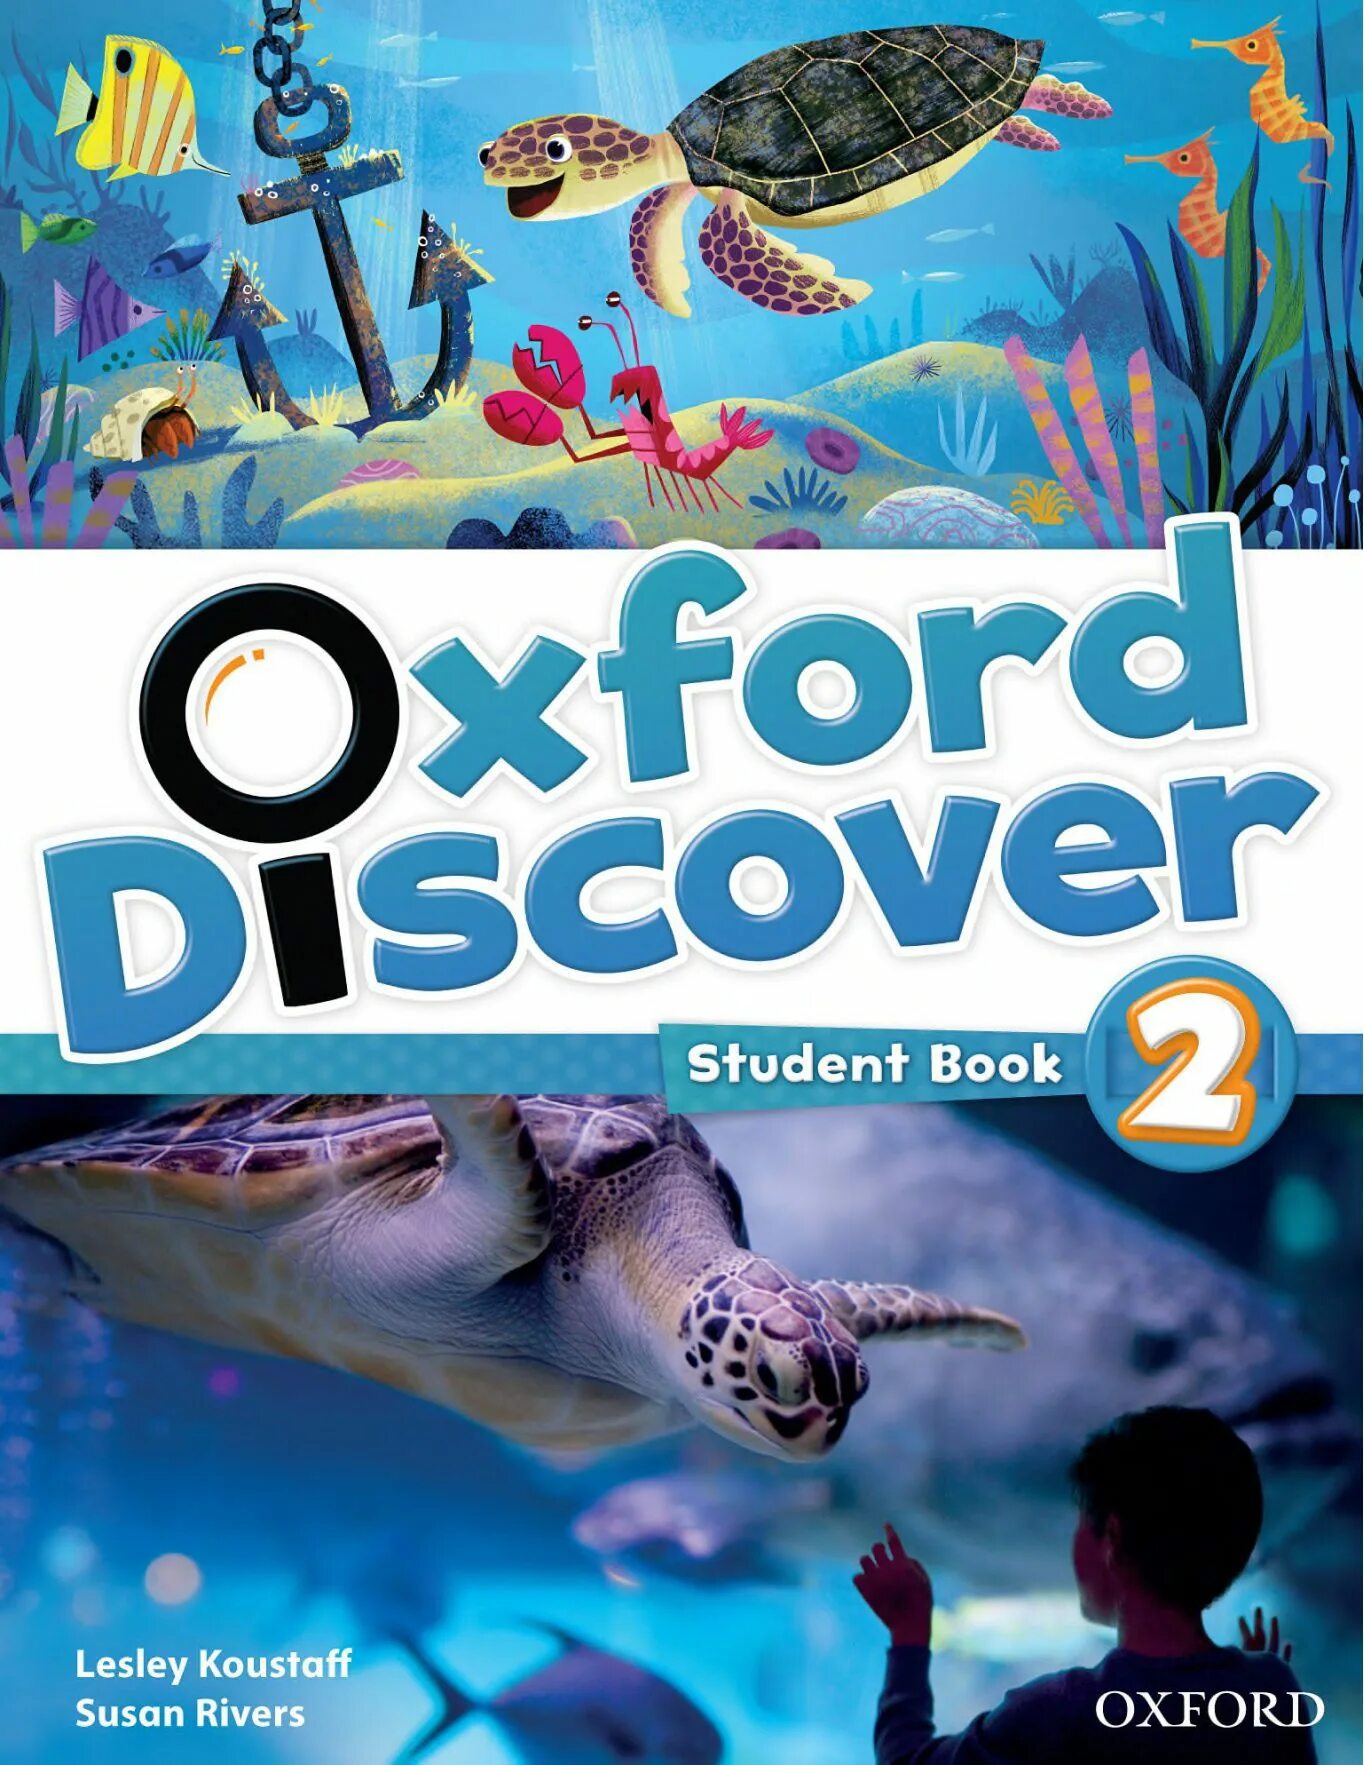 Oxford discover 2nd Edition. Oxford Discovery 2. Oxford discover 1 student book. Oxford Discovery student's book. Oxford discover book